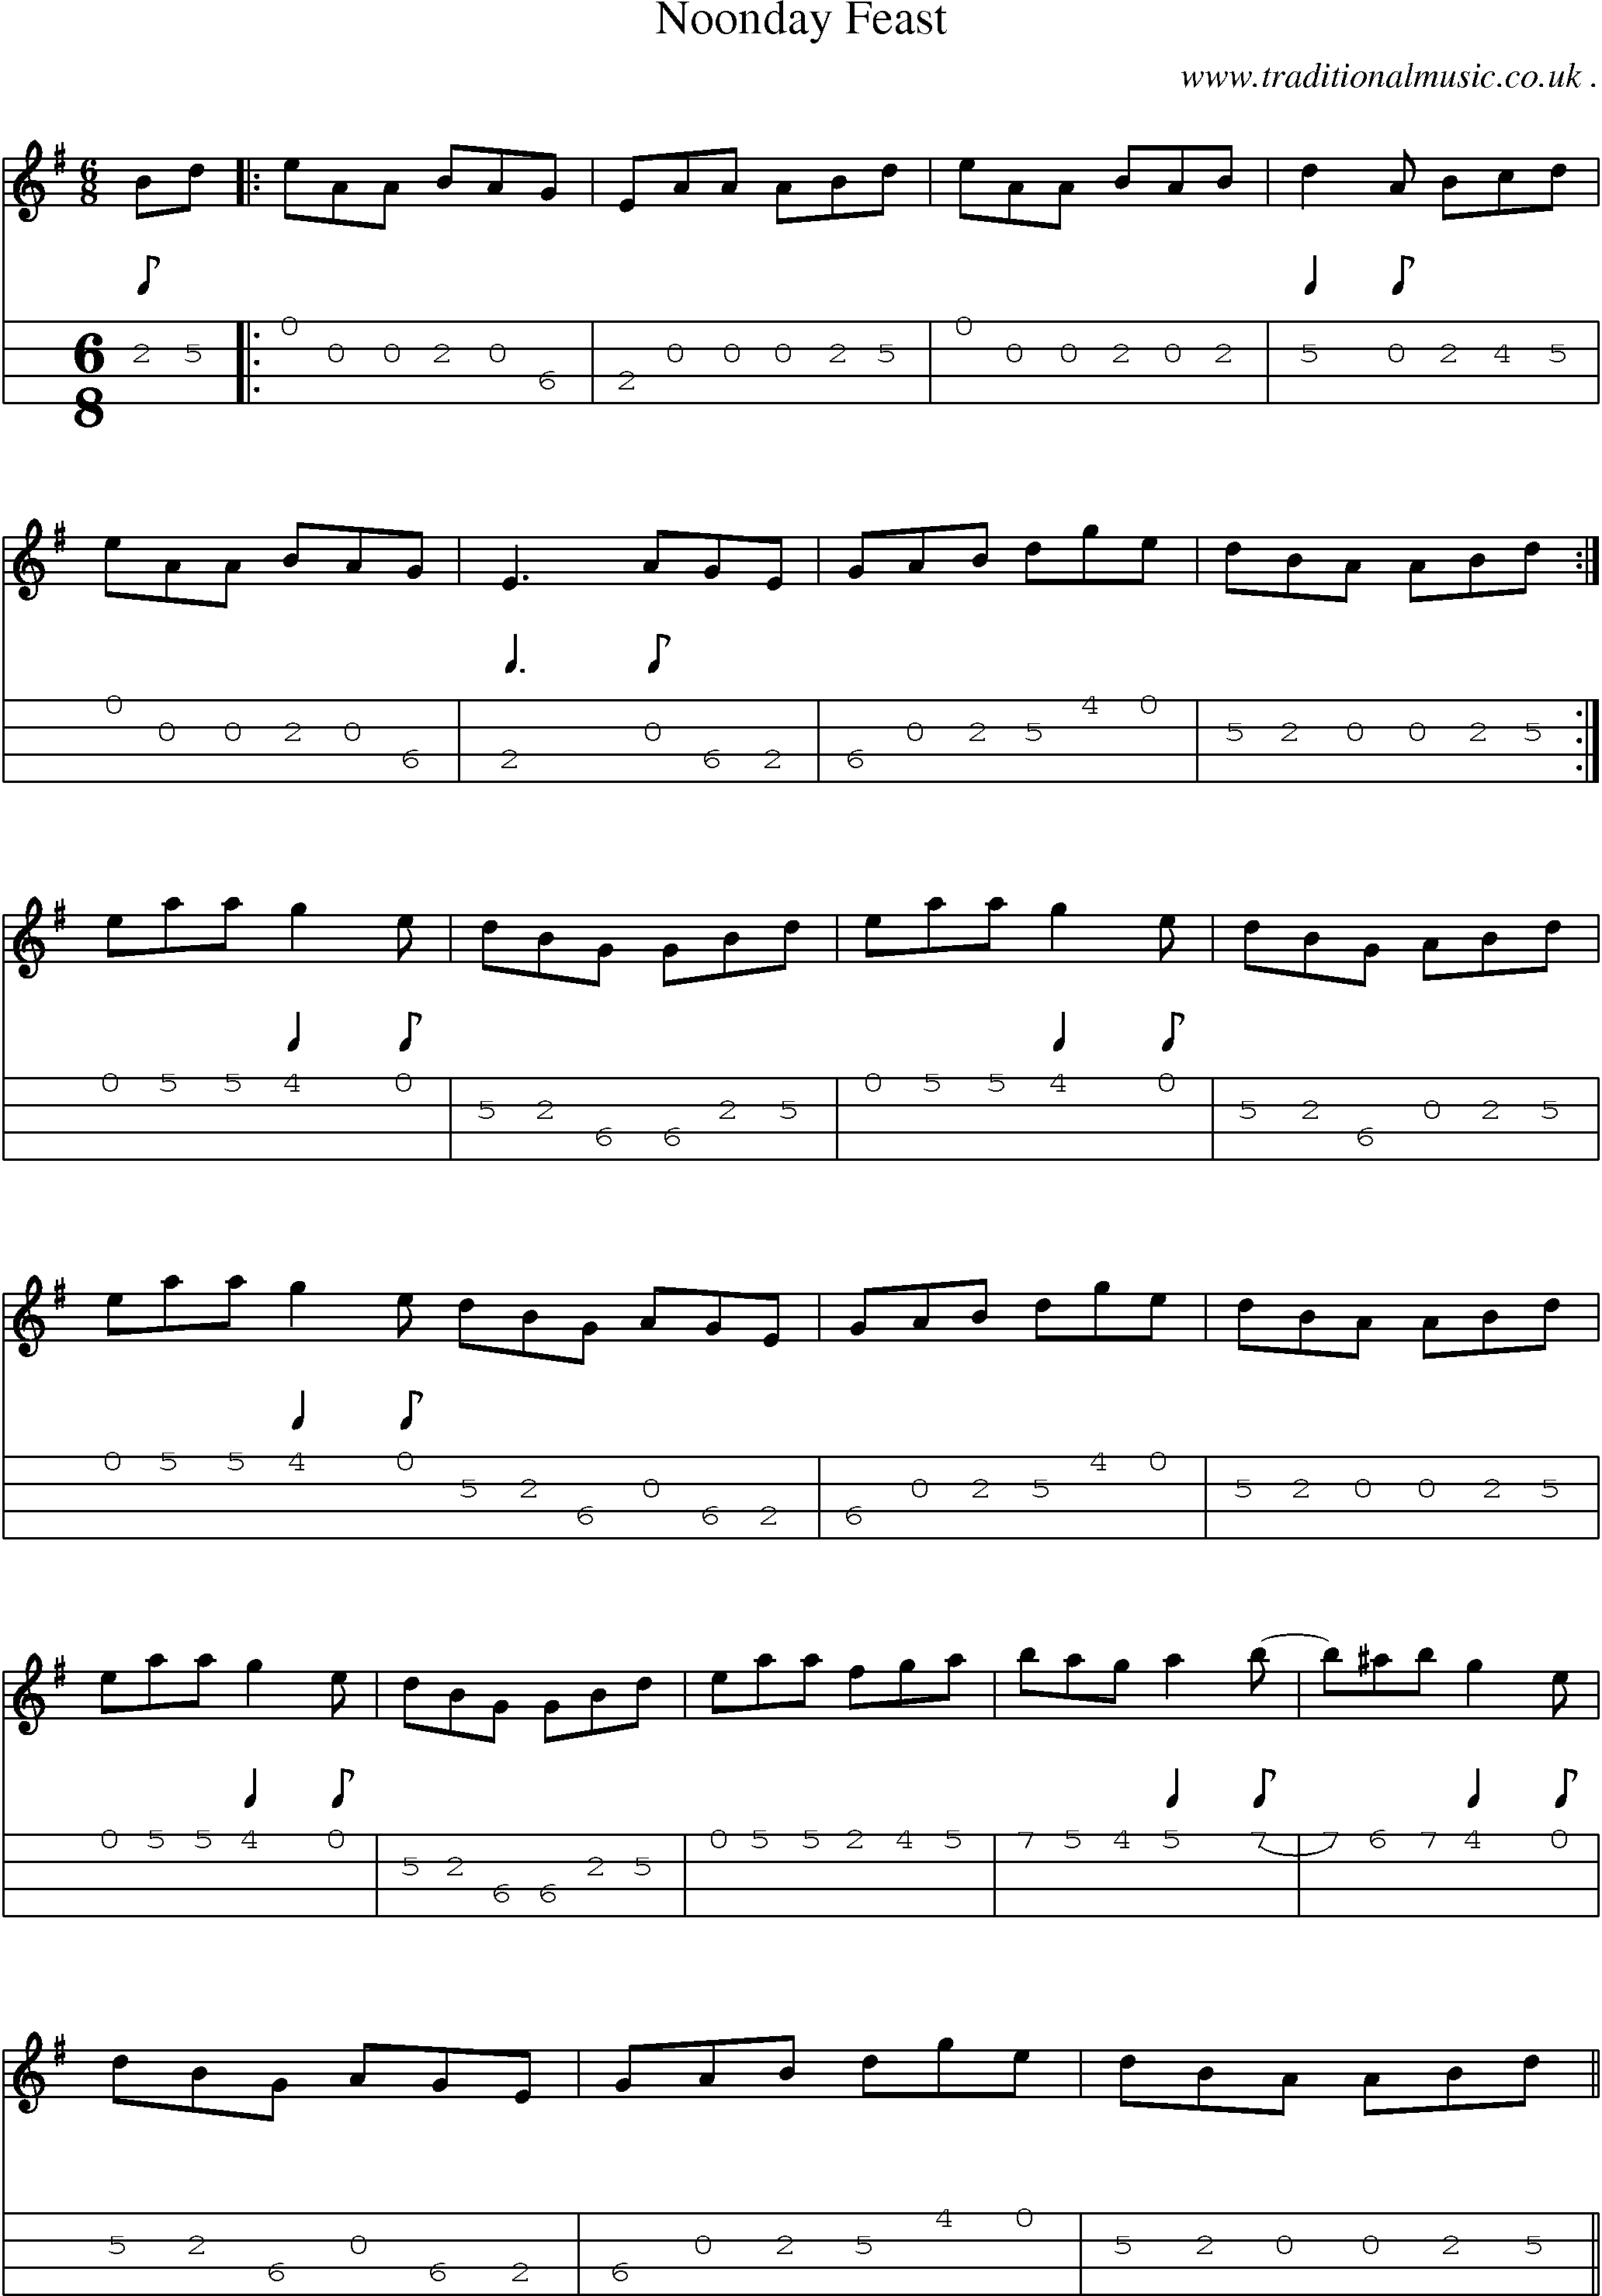 Sheet-Music and Mandolin Tabs for Noonday Feast